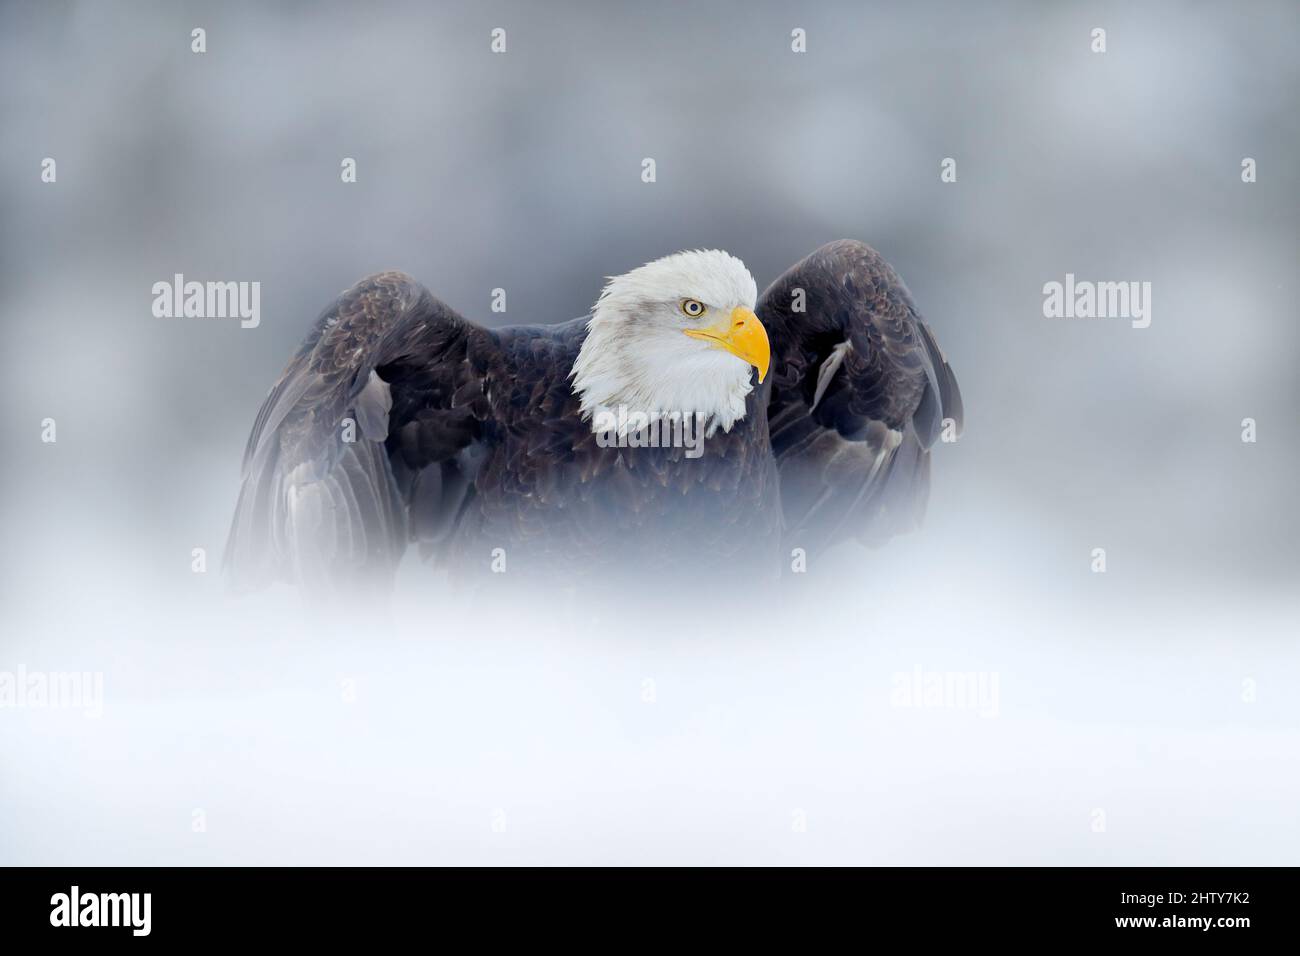 Bald Eagle, Haliaeetus leucocephalus, flying brown bird of prey with white head, yellow bill, symbol of freedom of the United States of America. Bald Stock Photo